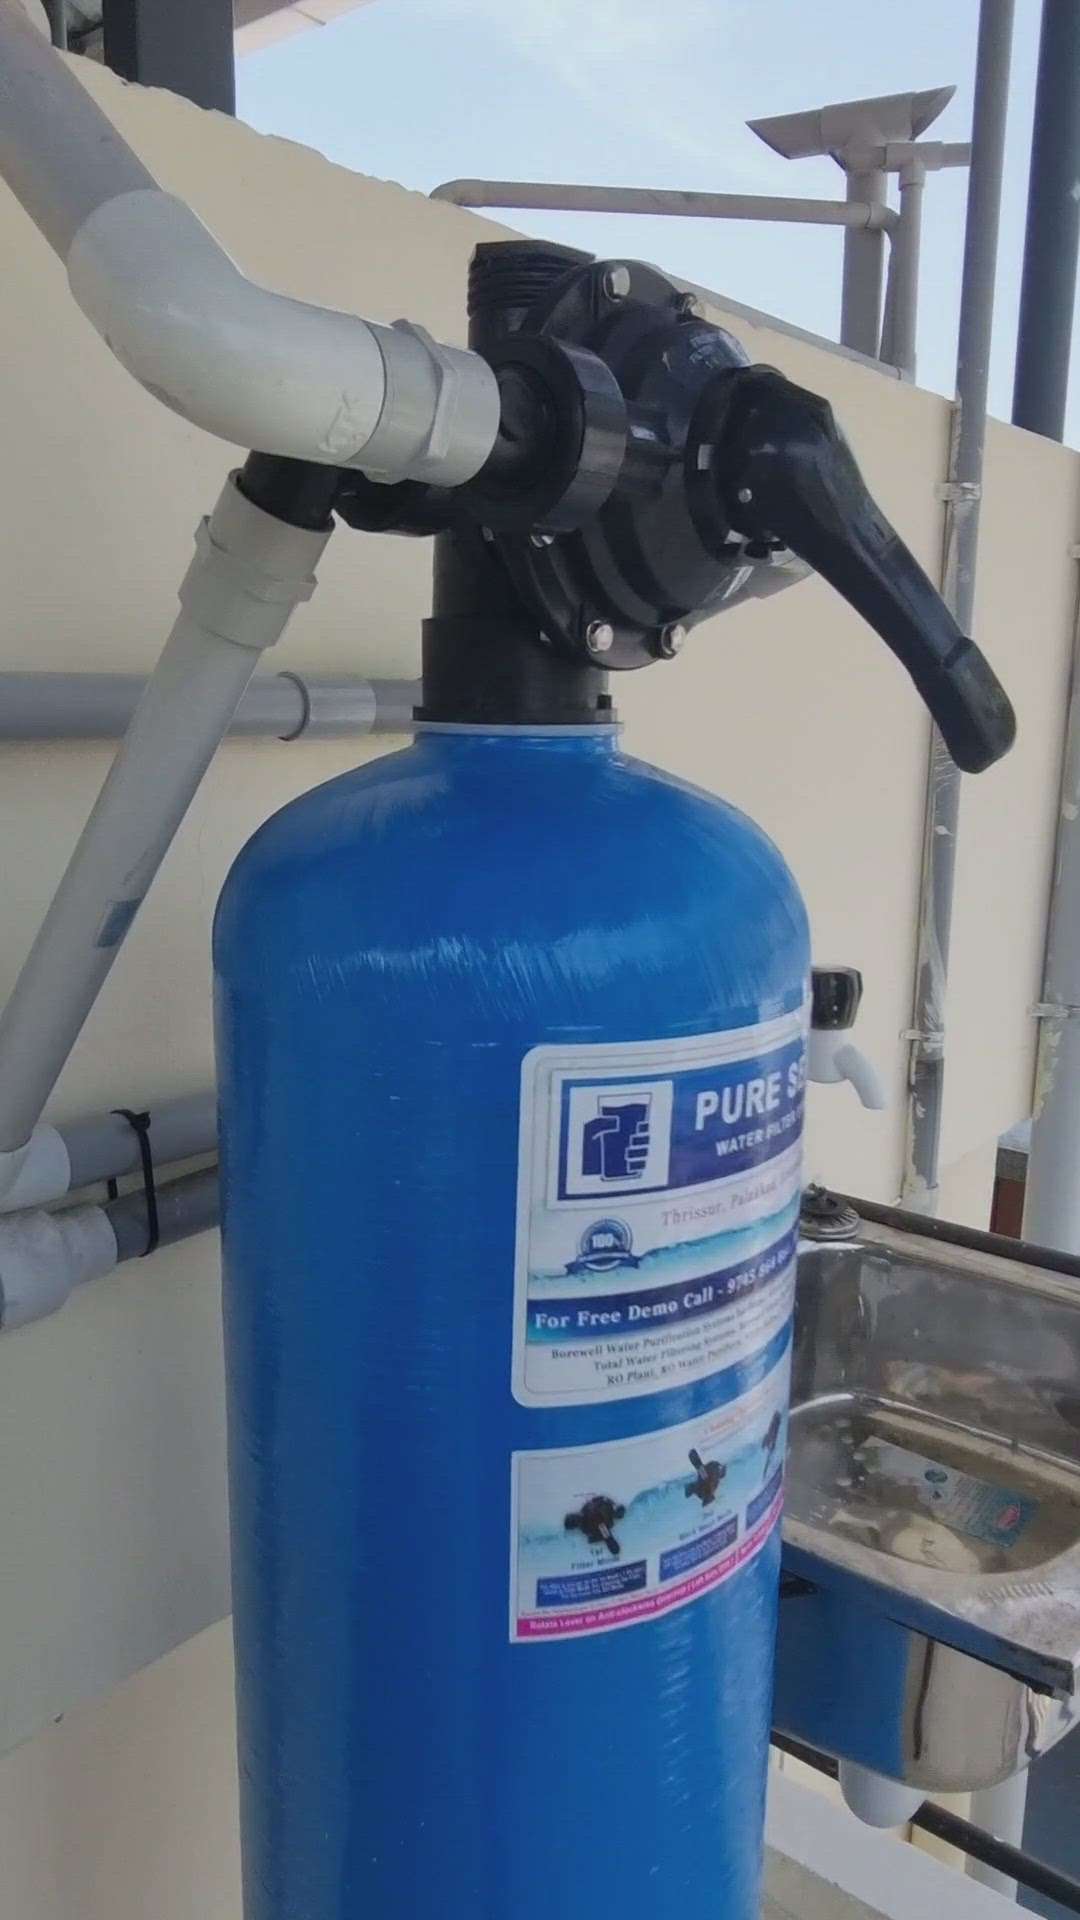 Borewell Iron Removal Water Purification Water Filter systems for Home Use in Kerala Best Price

#water
#WaterPurifier
#WaterFilter
#borewellwaterfilter  #watertreatmentexperts
#Watertreatment
#waterpurification
#water_treatment
#watersoftener
#water_puririer
#borewell
#WaterPurity
#drinkingwater
#UV
#water_tank
#WaterPurity
#WaterTank
#filterrwork
#filtration
#filter
#filtersetting
#DrinkPure
#water
#purifierservice
#purification
#purifiers
#wellwater
#ironremover
#iron
#hard
#Soft
#softener
#PureSenseWaterFilterSystem
#Thrissur
#BorewellWaterFiltrationSystem
#BorewellWaterPurification
#BorewellWaterFilterPriceInKerala
#WaterFiltationSystemforHomePrice